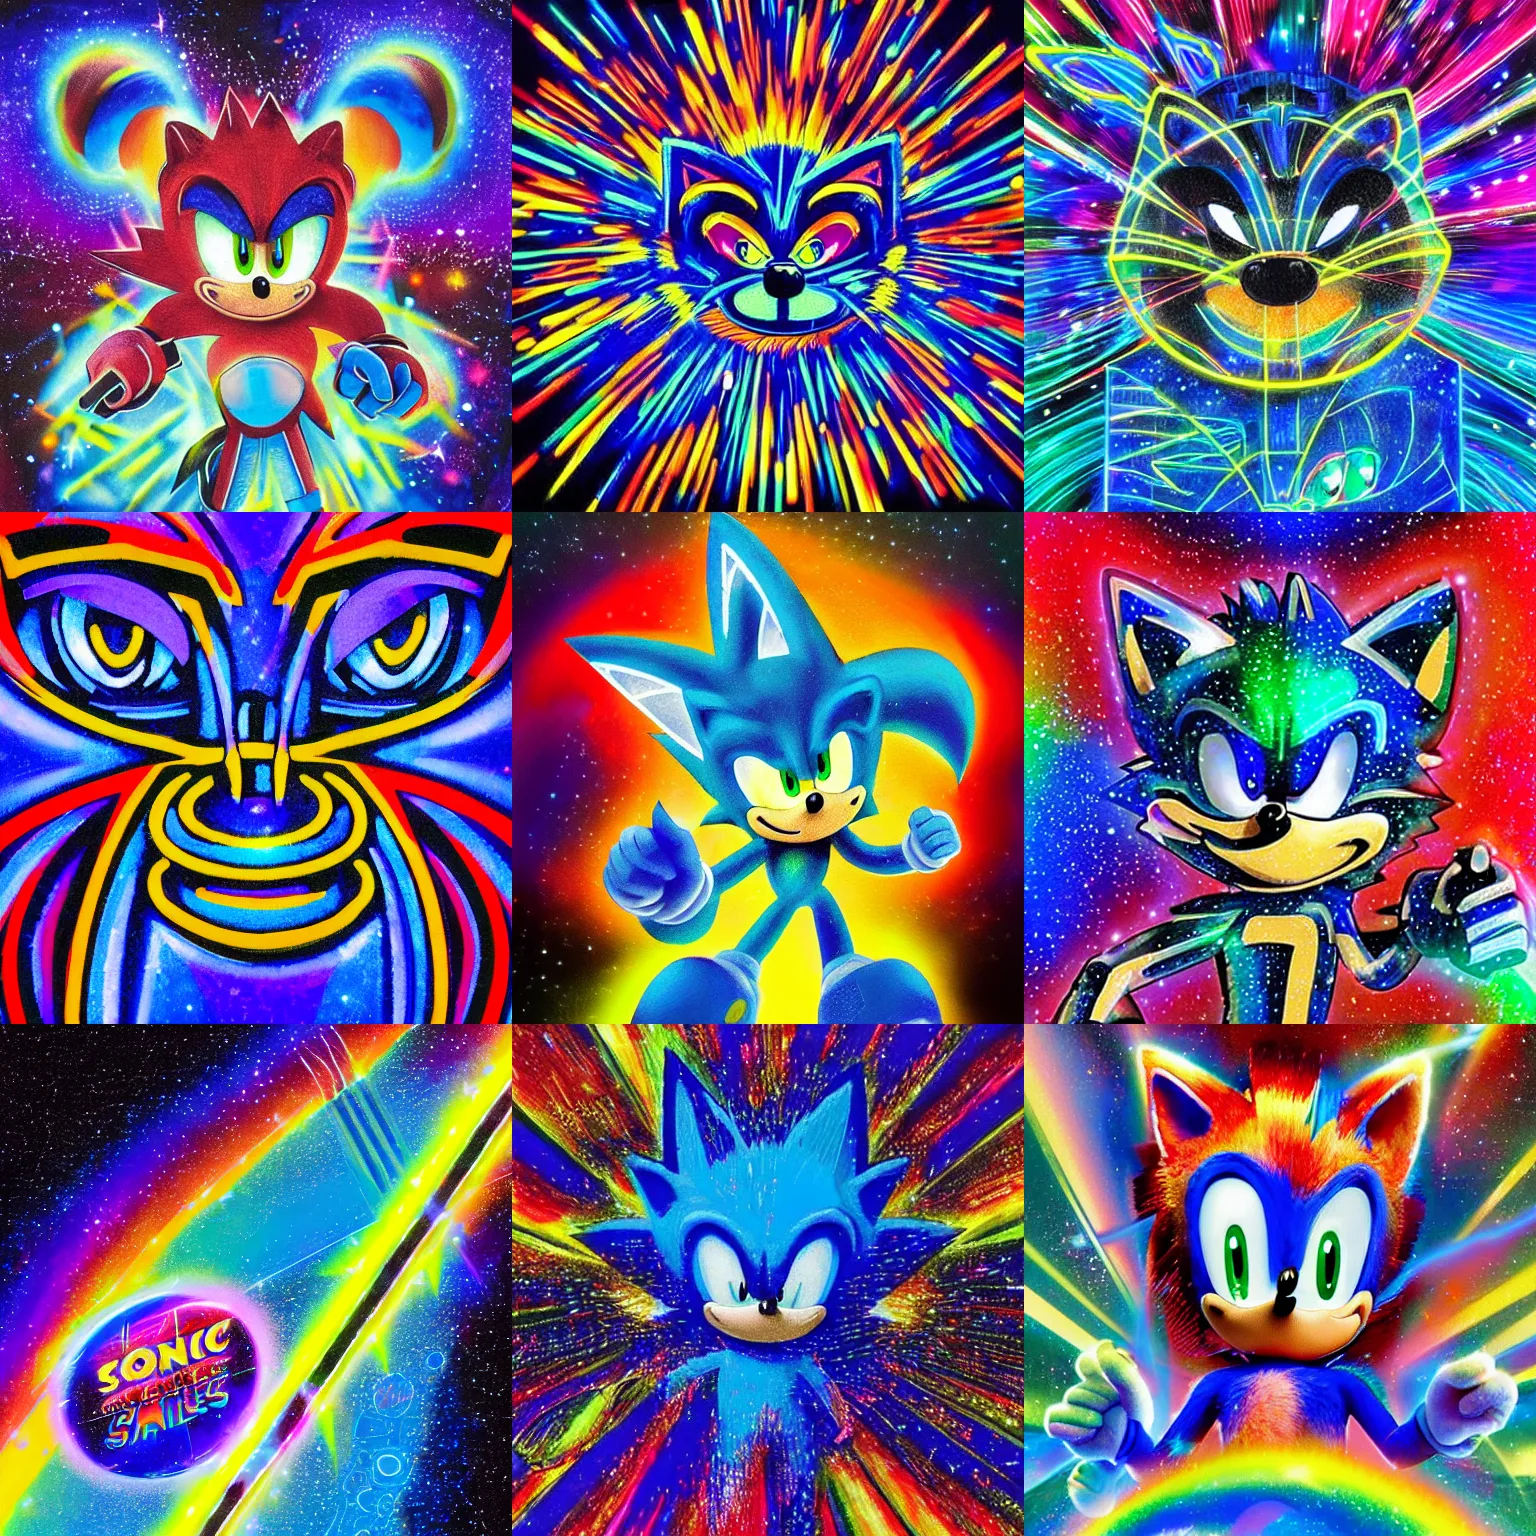 Prompt: sonic the hedgehog closeup portrait of Neon sonic the hedgehog 🌌 in metallic light trail light saber galaxies by Okuda San Miguel and kandinsky on a starry black canvas, sonic the hedgehog galaxy gas brushstrokes, metallic flecked paint, metallic flecks, glittering metal paint, sonic the hedgehog metallic paint, glossy flecks of iridescence, glow in the dark, Uv, blacklight, colorful, 8k, 4k, brush strokes, painting, highly detailed, iridescent brushed metal sonic the hedgehog